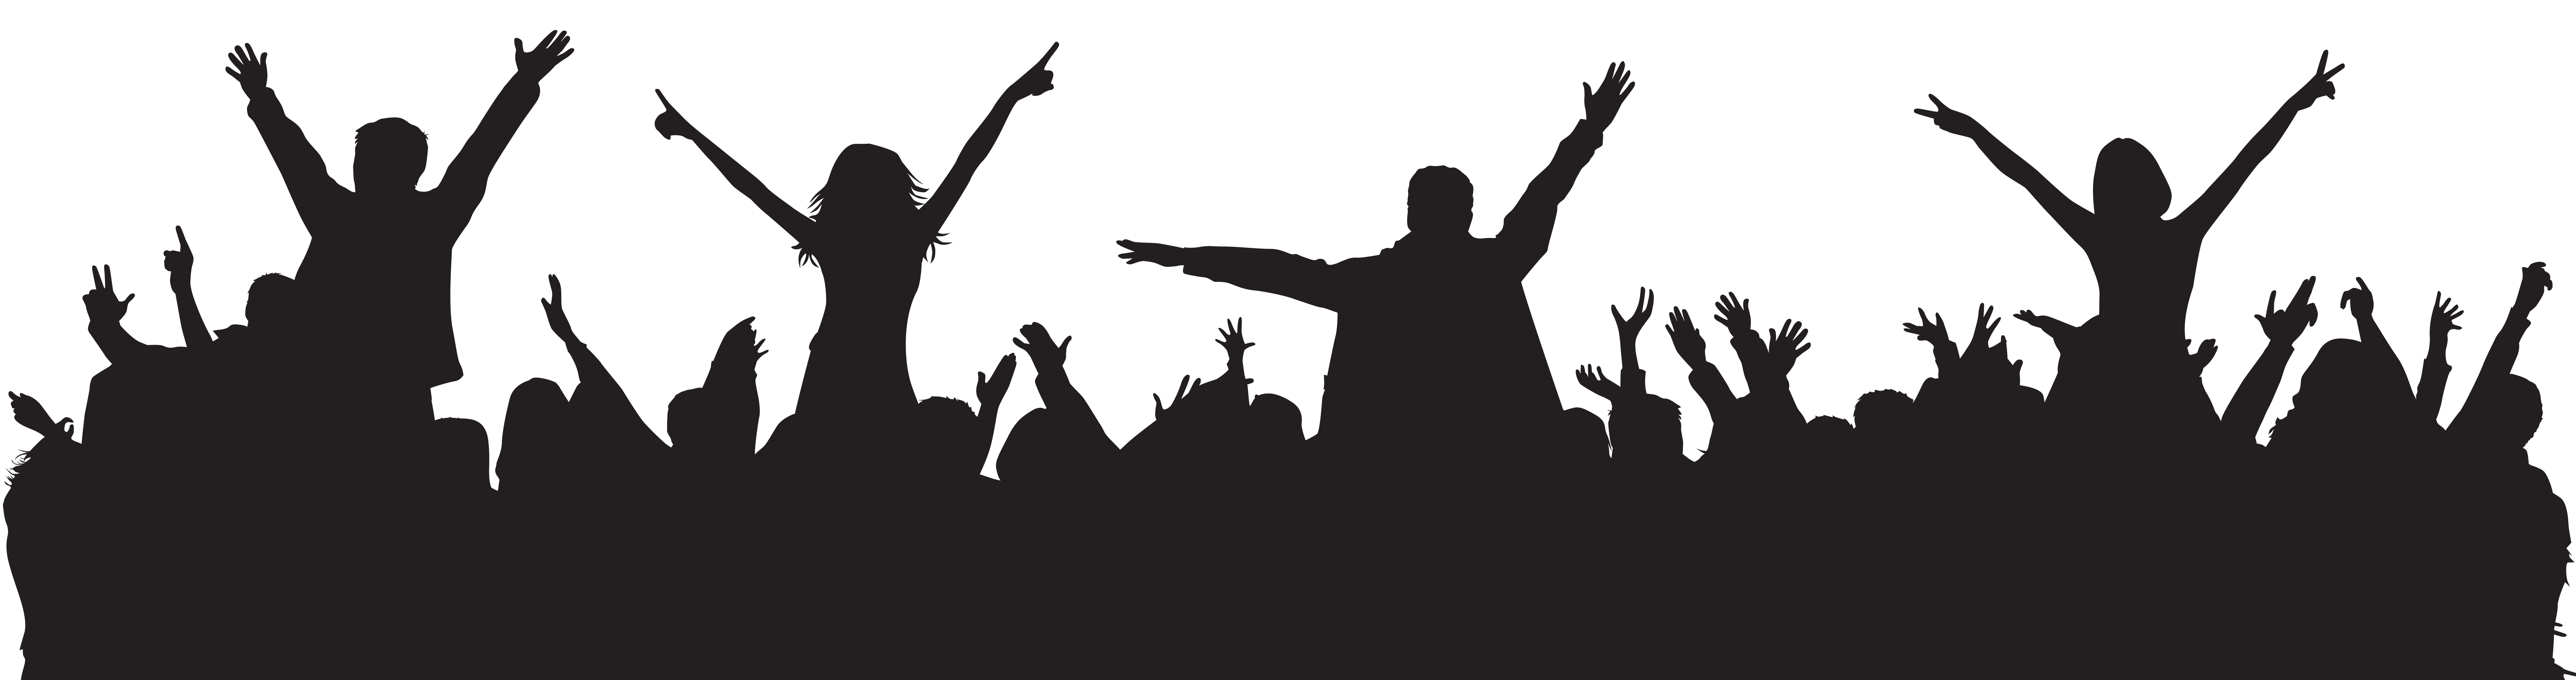 people clipart silhouette